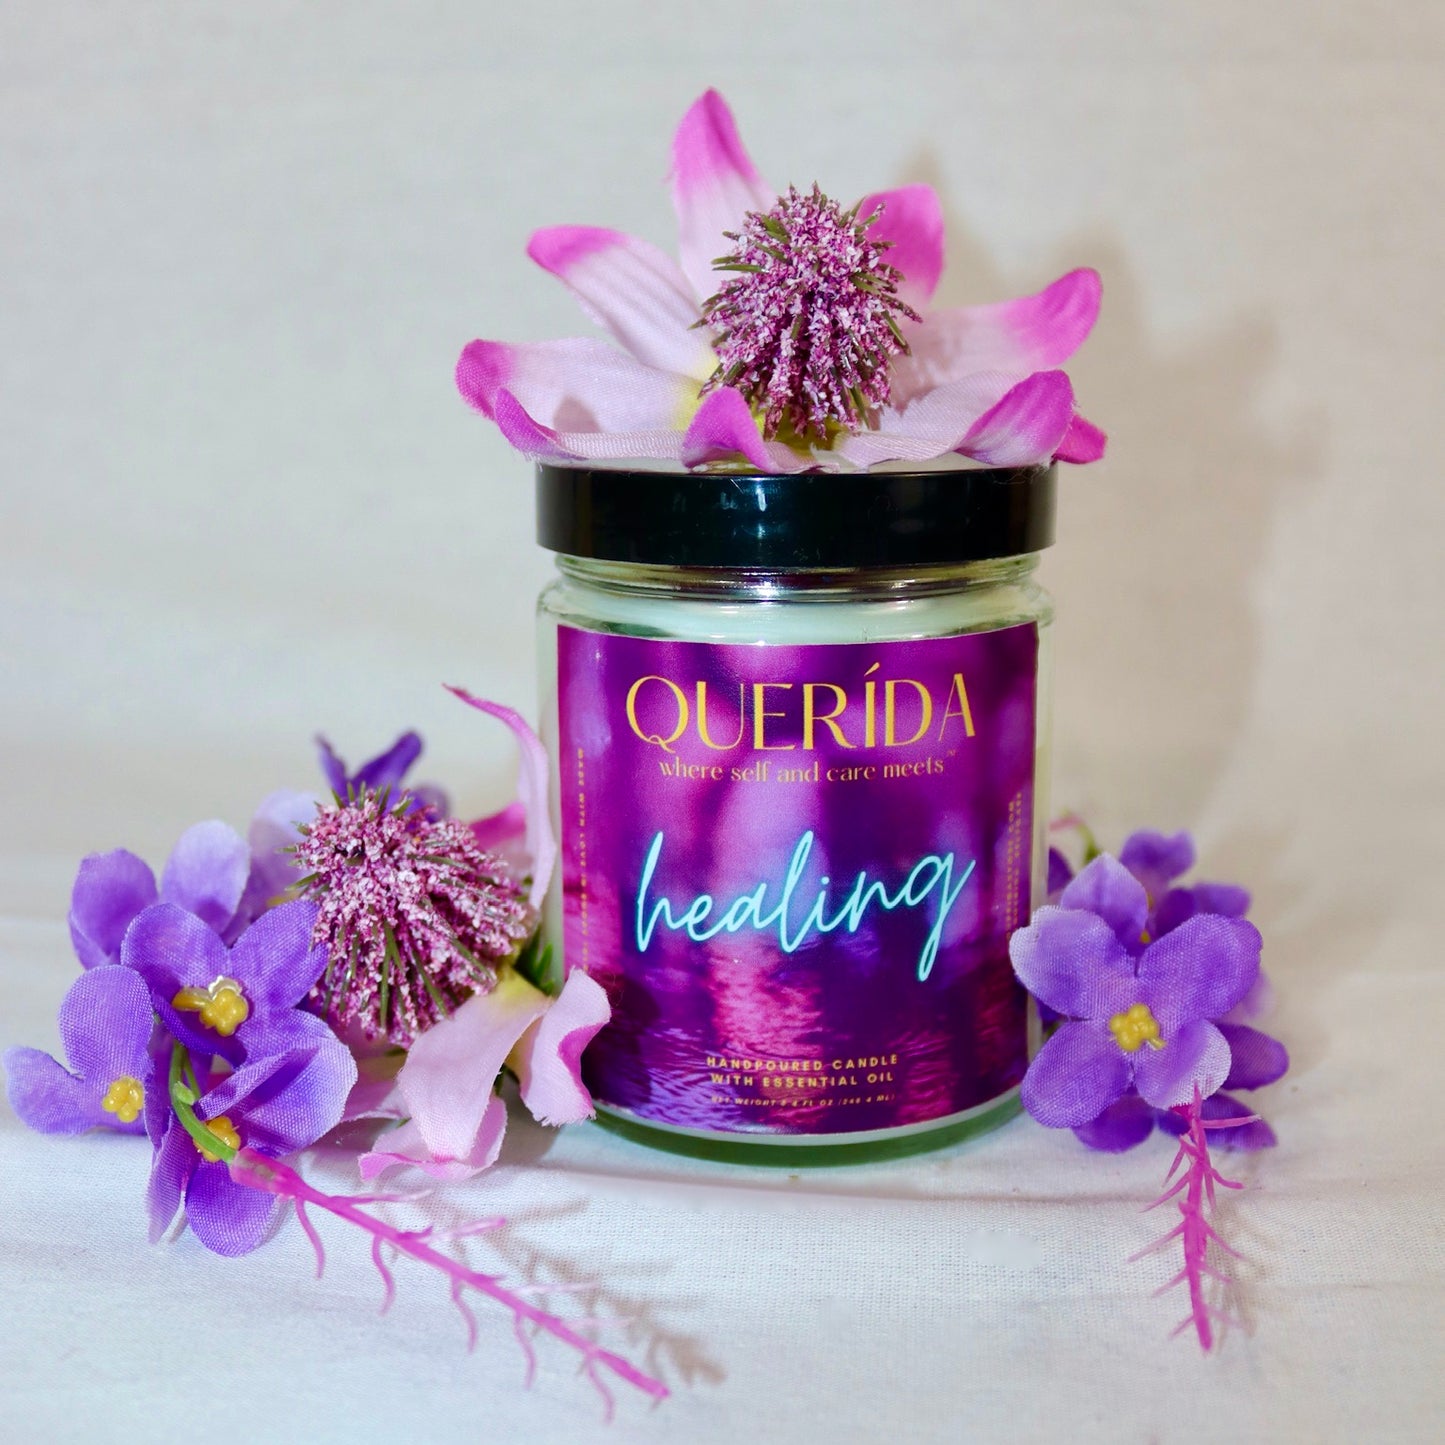 'Healing' Candle